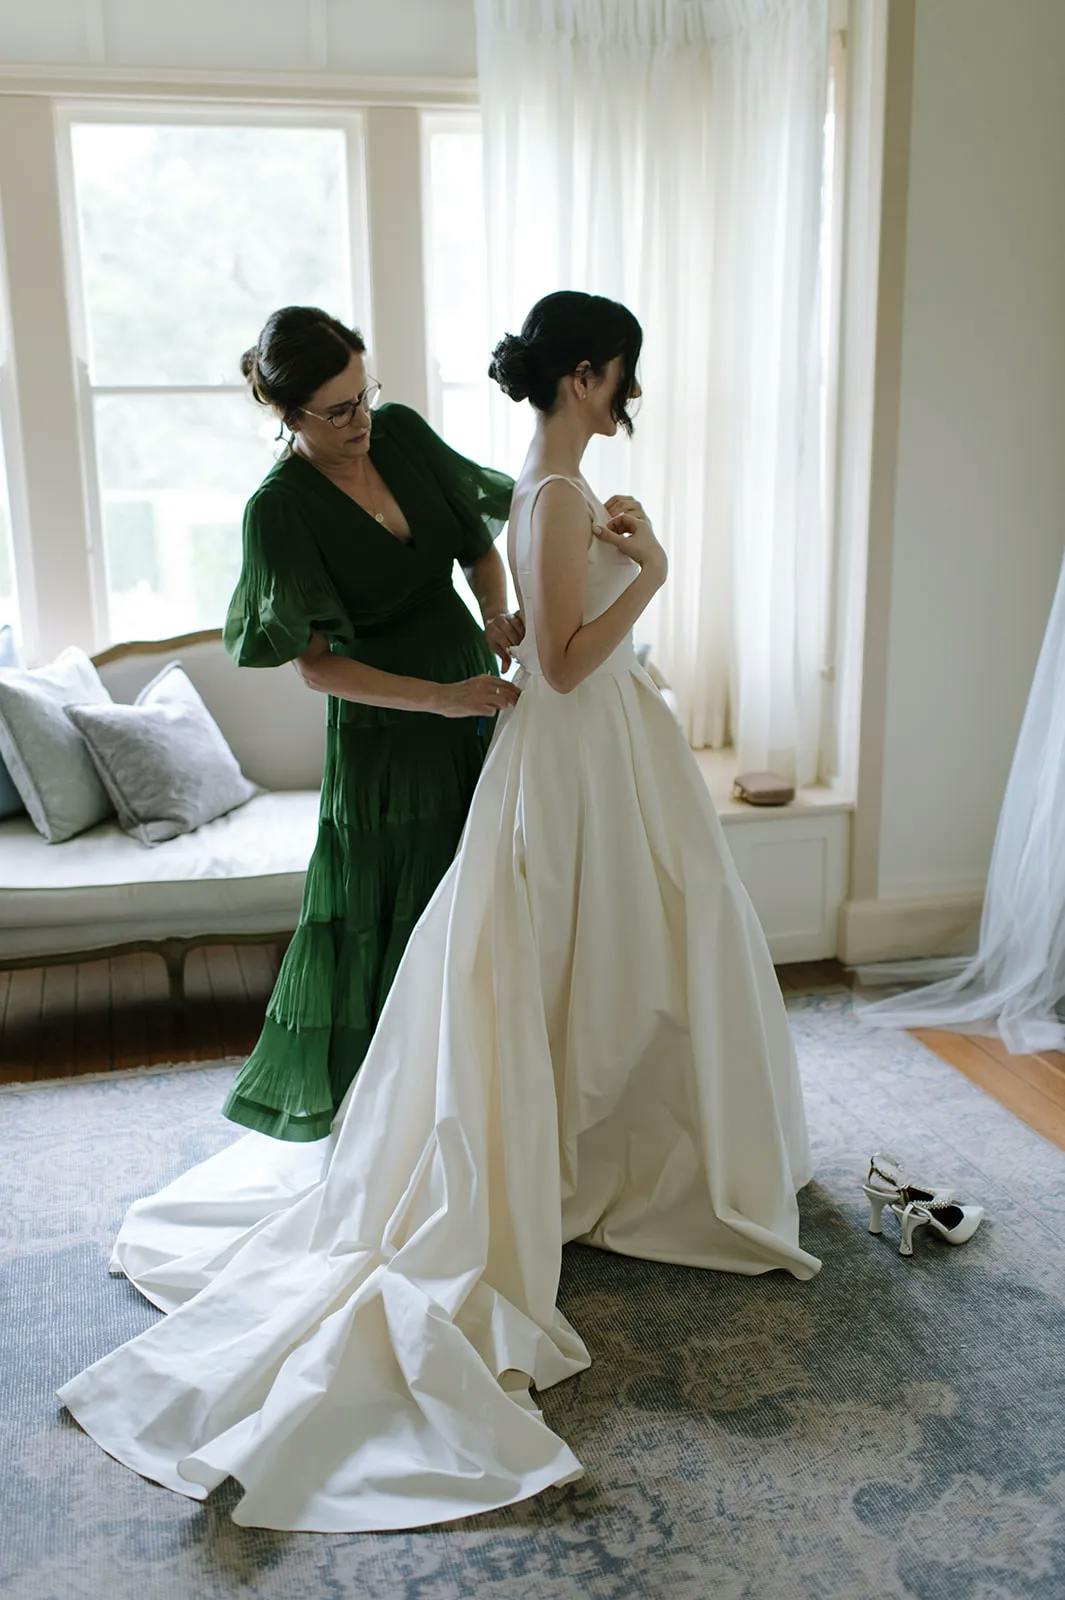 A woman in a white wedding dress stands while another woman in a green dress helps adjust the back of her dress. They are in a well-lit room with large windows, a couch with pillows, and a pair of high heels on the floor. The train of the wedding dress cascades behind.